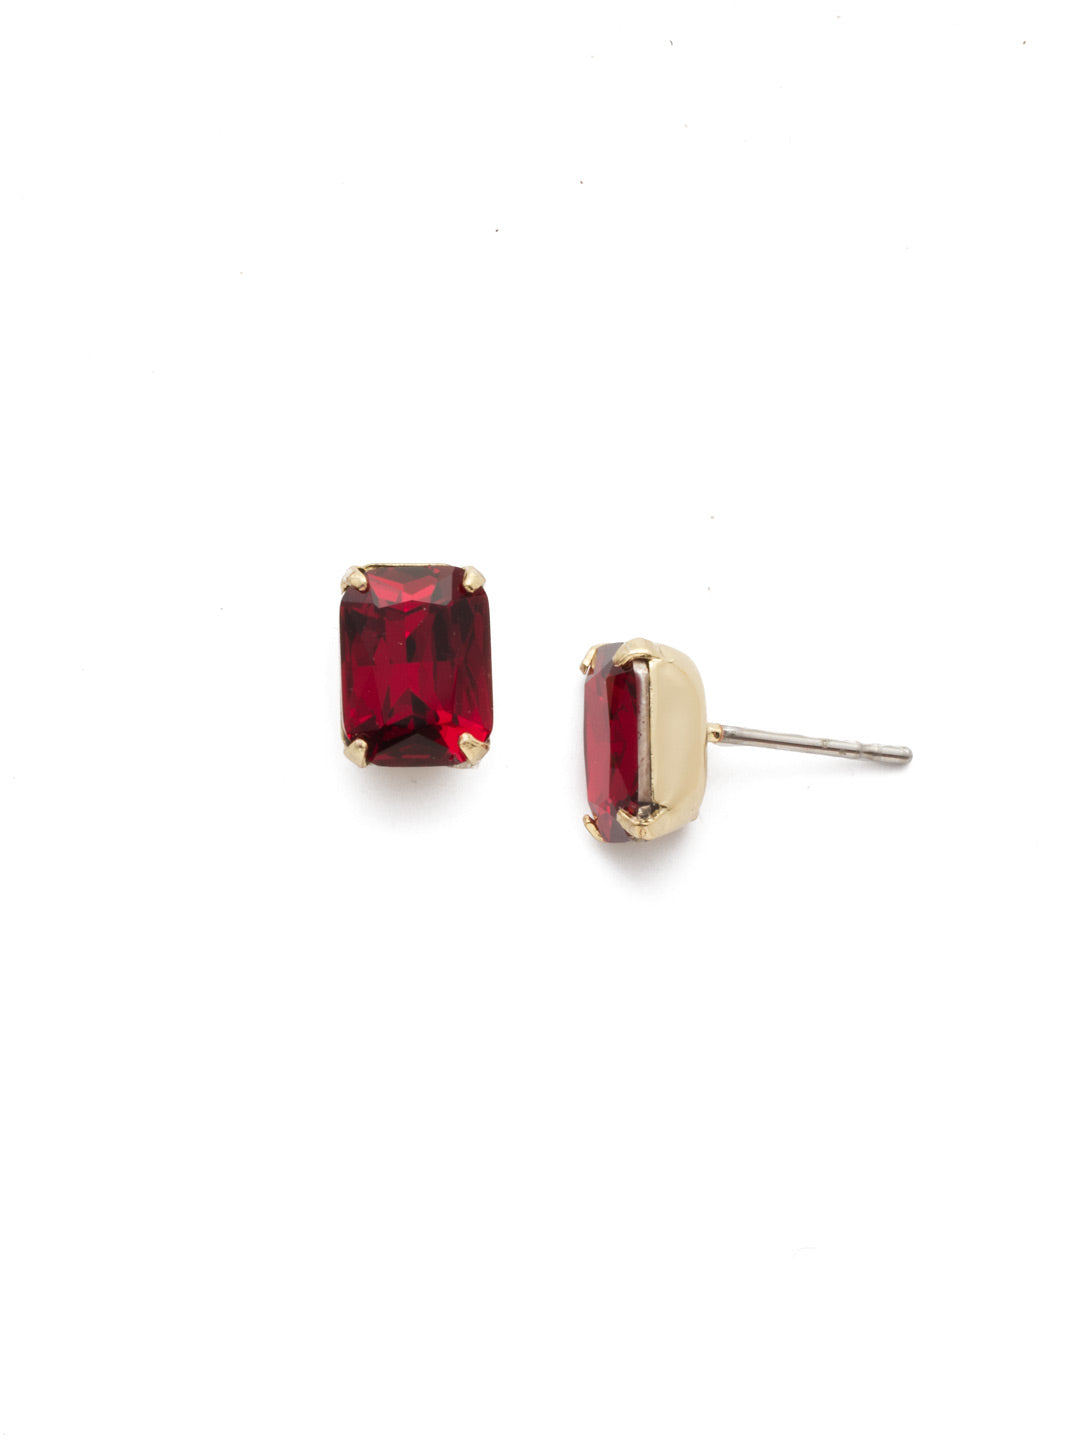 Mini Emerald Cut Stud Earrings - EBY42BGSI - <p>Simply sophisticated. The mini emerald cut stud earrings can be worn alone or paired with anything for an extra accent to any wardrobe. From Sorrelli's Siam collection in our Bright Gold-tone finish.</p>